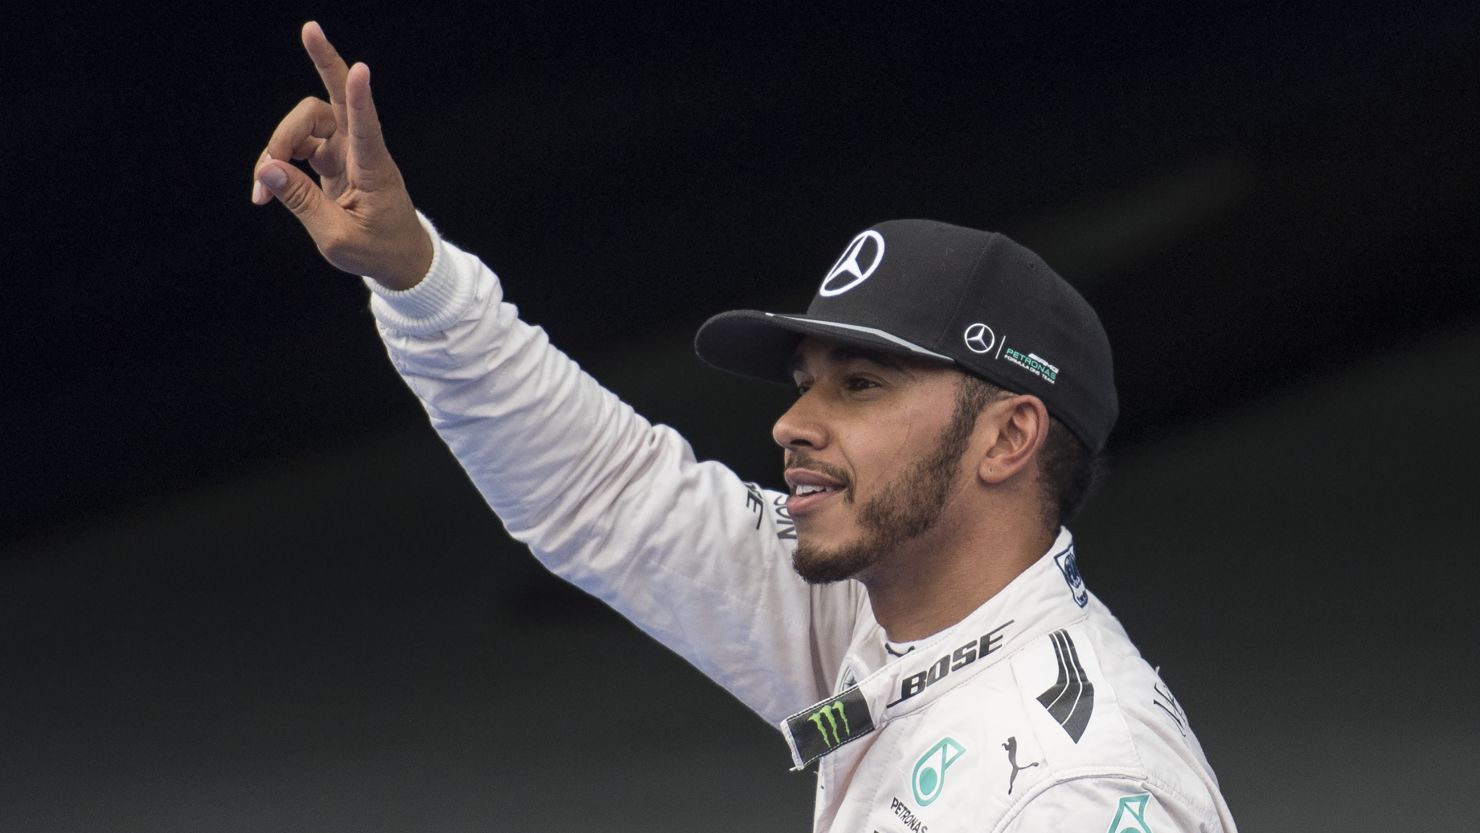 Lewis Hamilton gestures after taking pole position at the Malaysian Grand Prix.